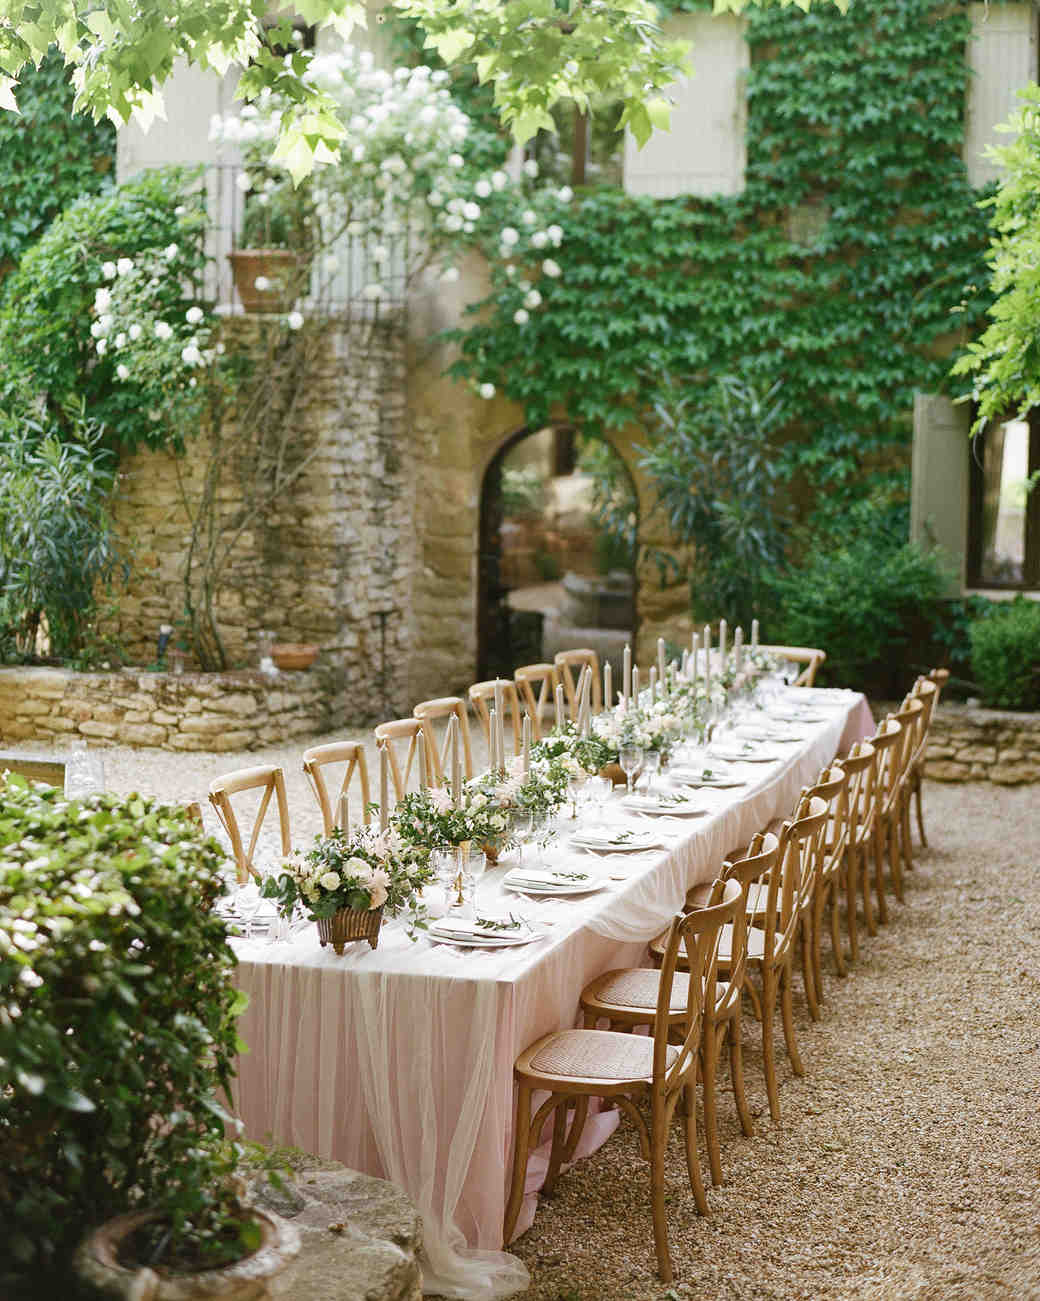 Blush tablecloths and tulle overlays, blush flower and greenery centerpieces for these long tables